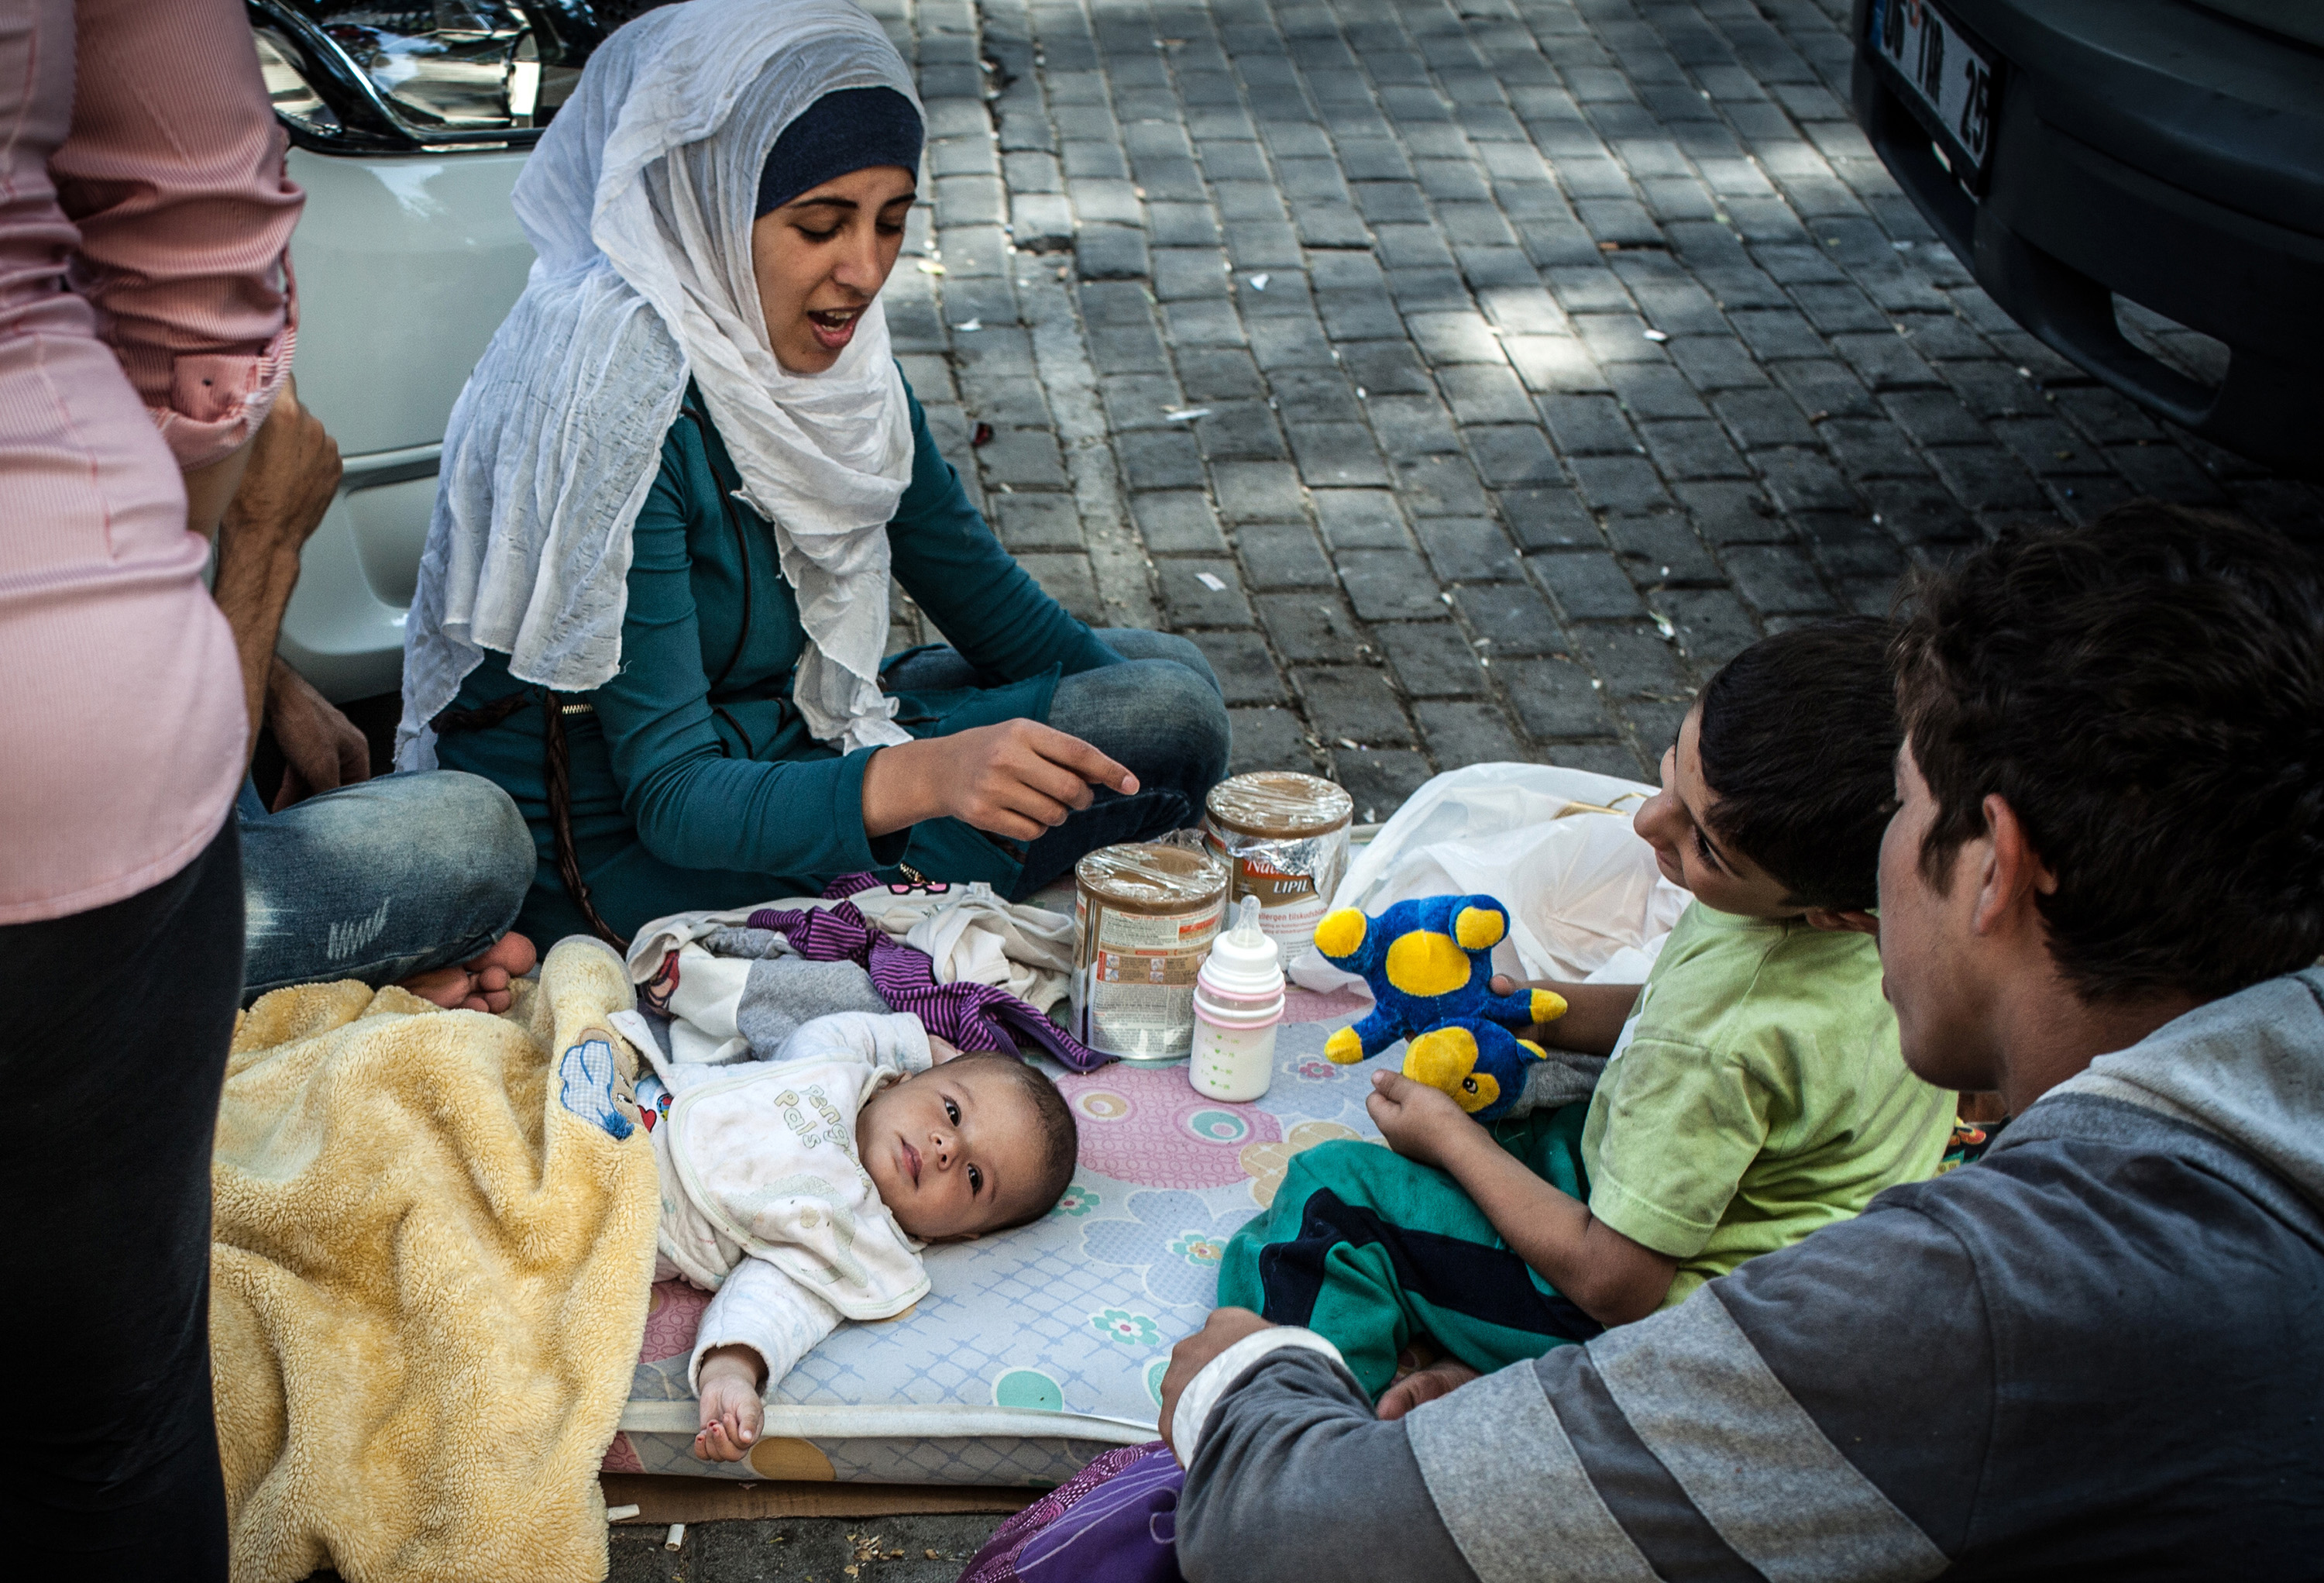 A Syrian family stays on the street where they have been sleeping in Izmir, Turkey, while they attempt to reach Greece by boat on Sept. 3, 2015. Photo courtesy of Tribune News Service.